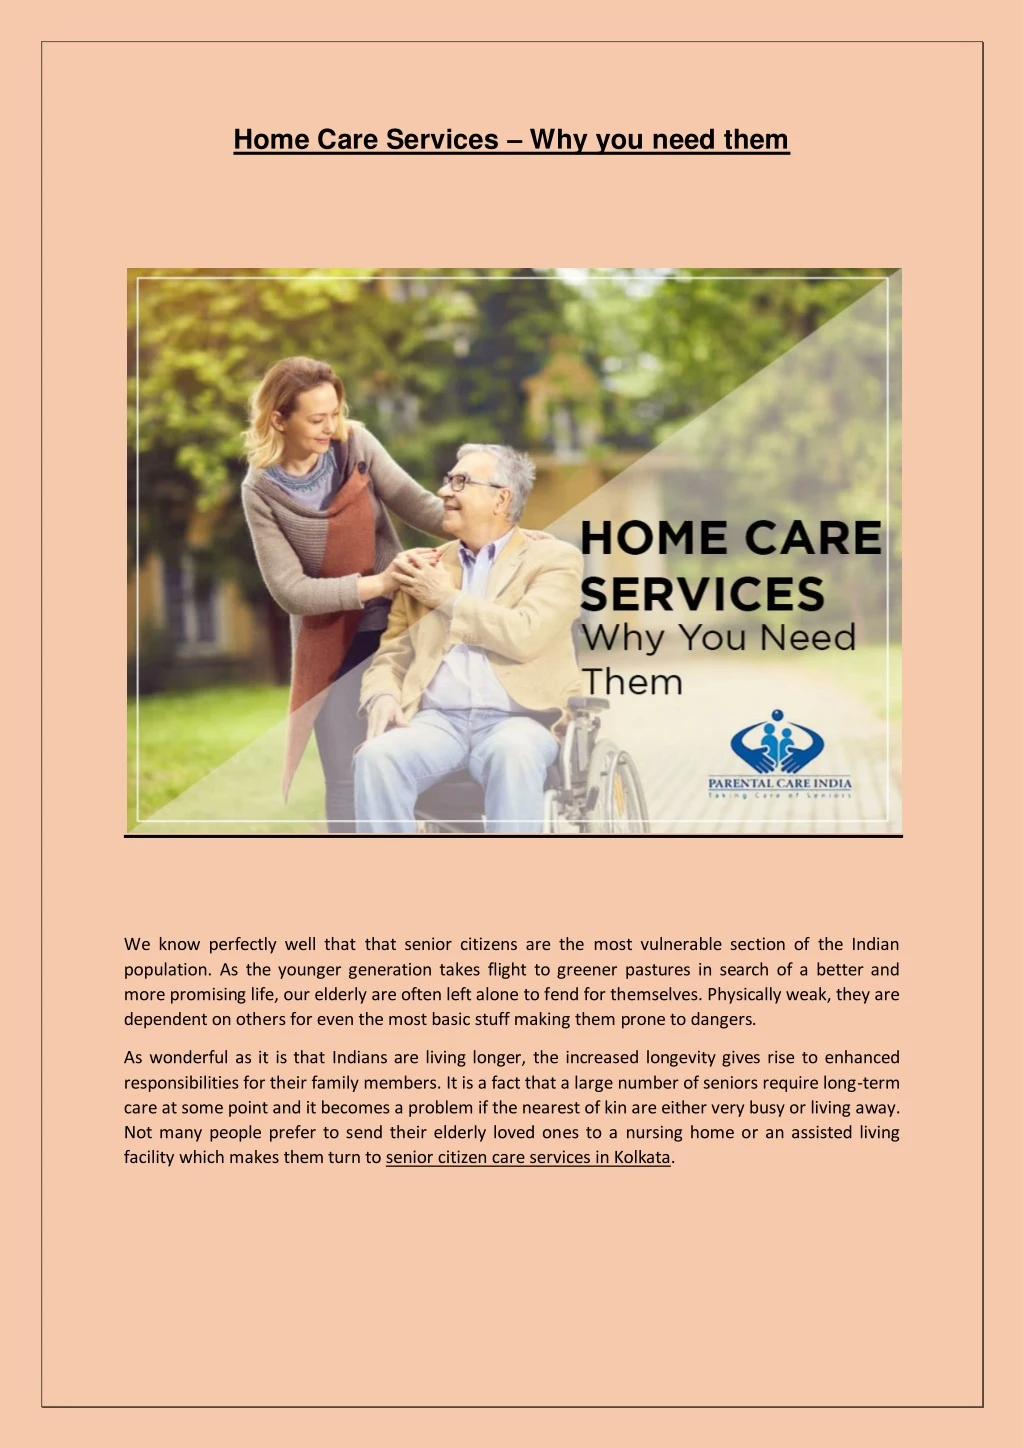 home care services why you need them